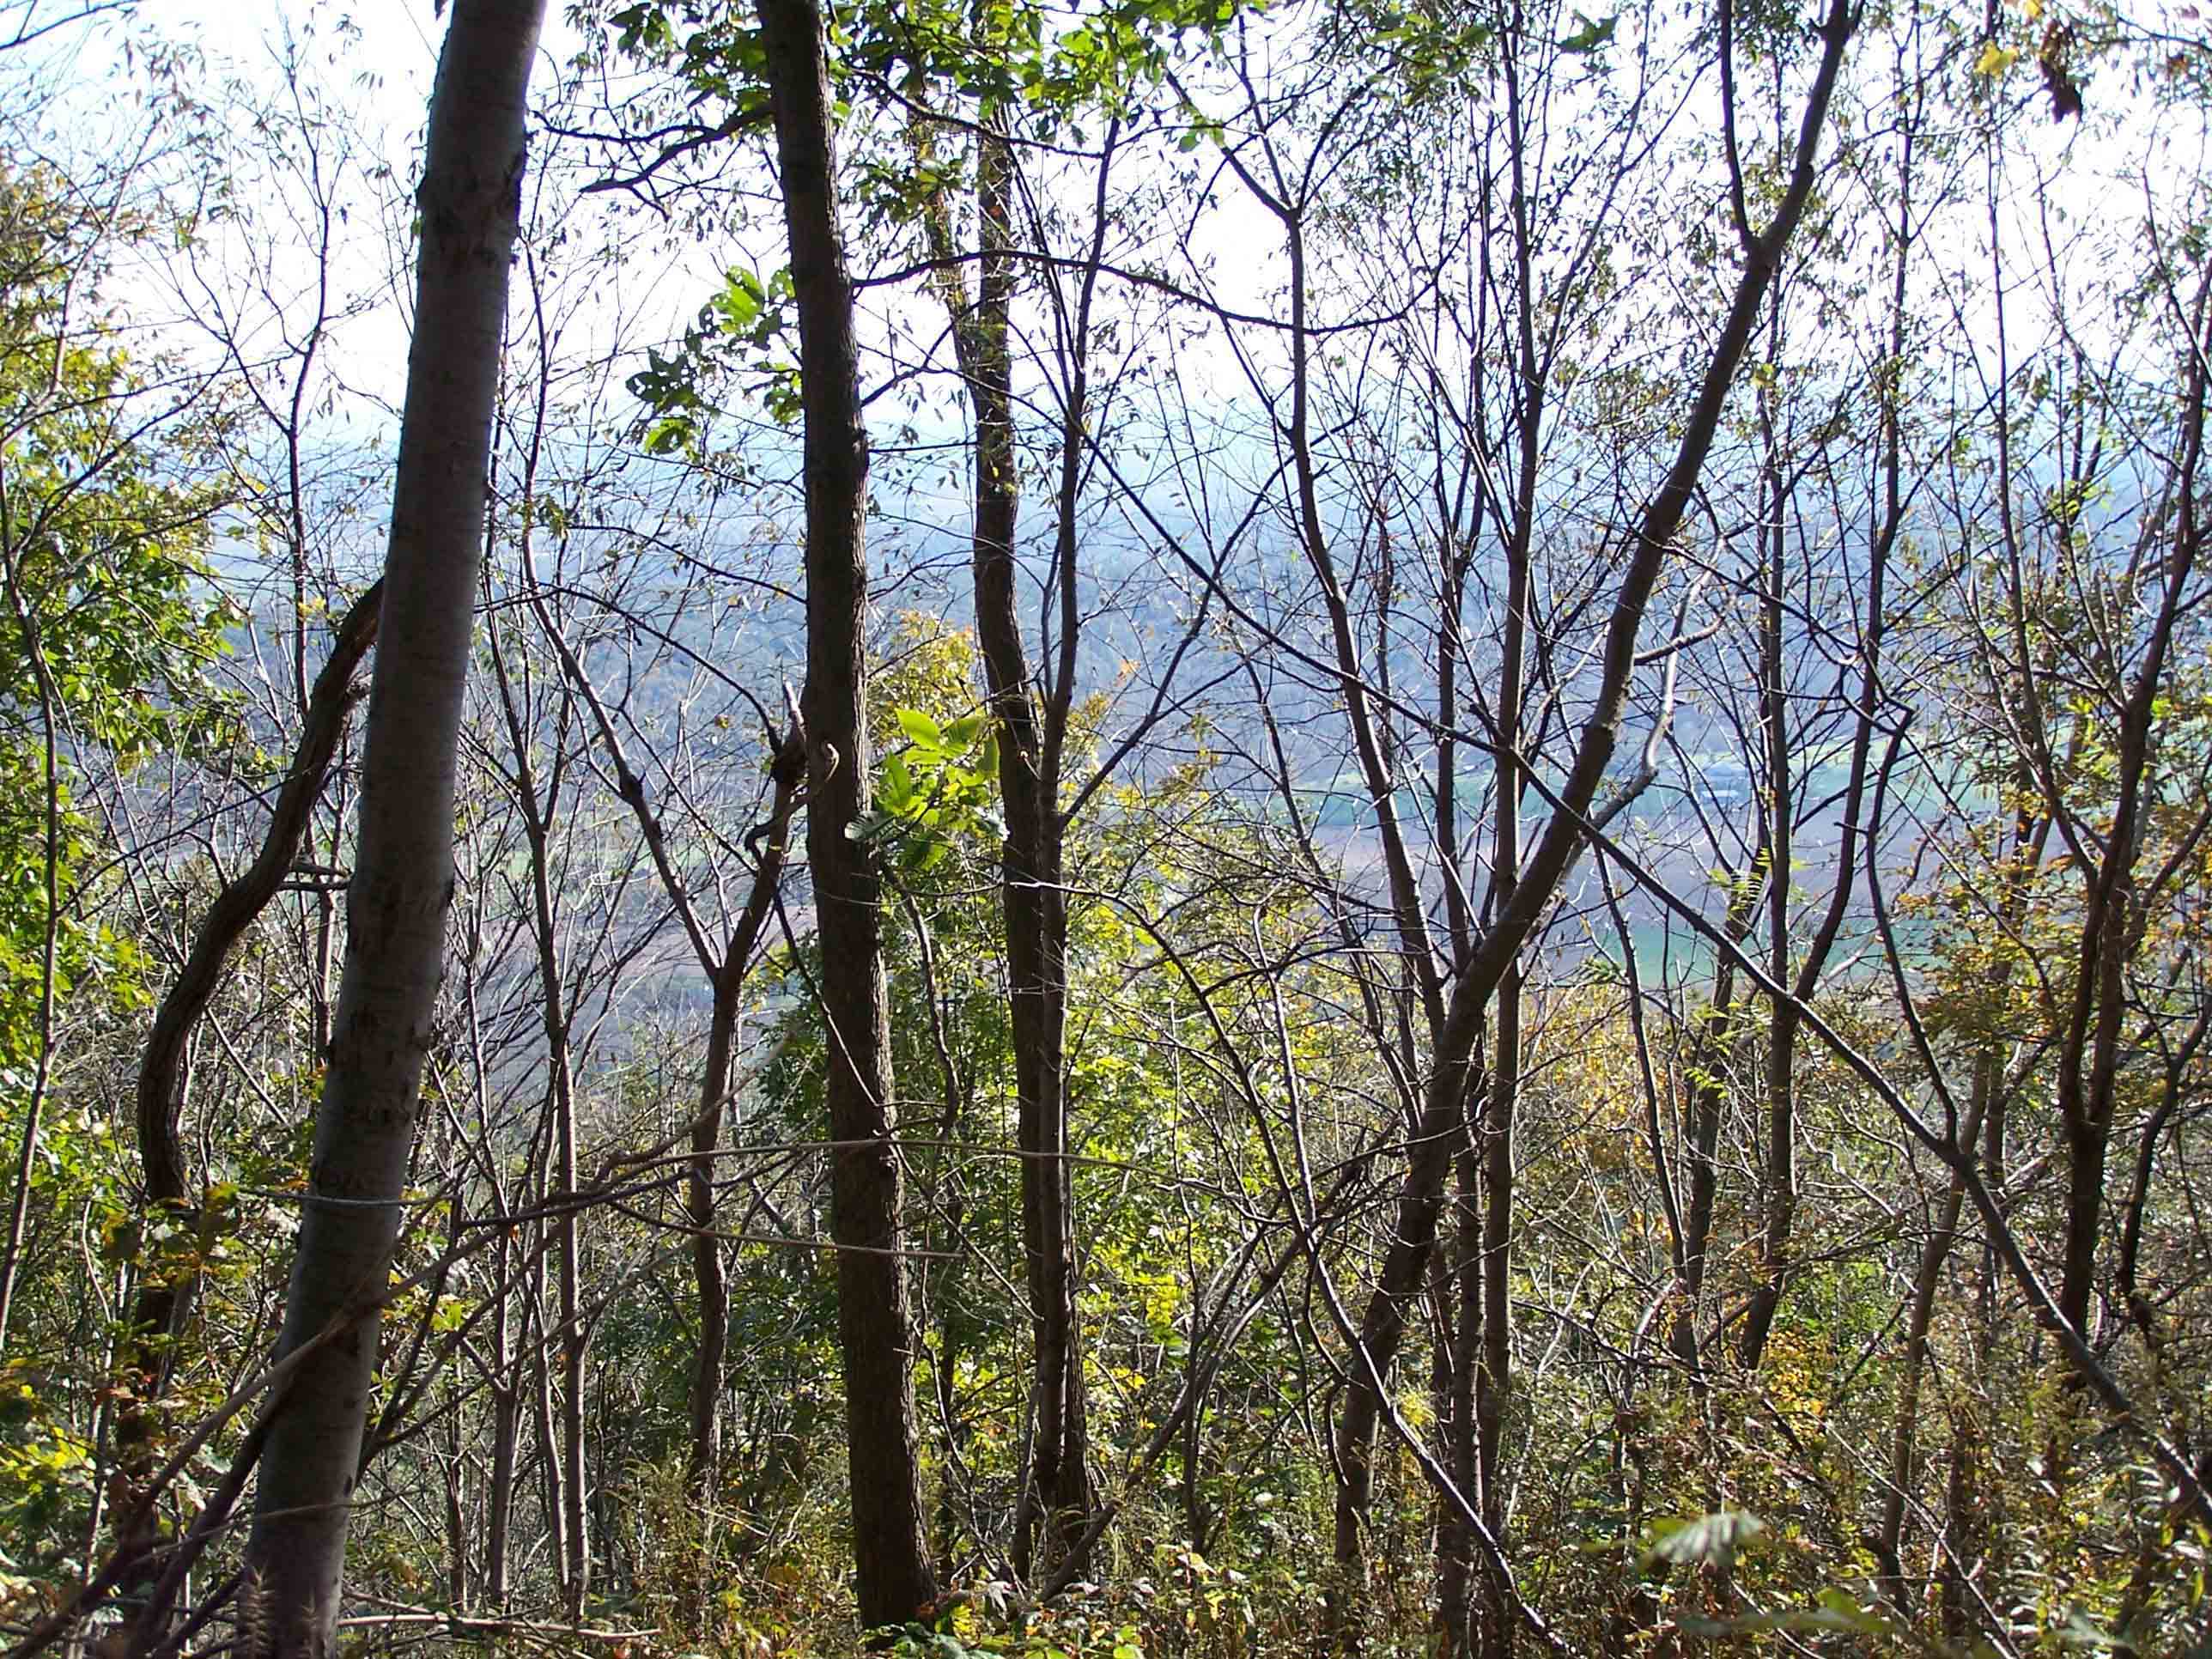 Trail views south of William Penn Shelter - north of Swatara Gap. Courtesy at@rohland.org